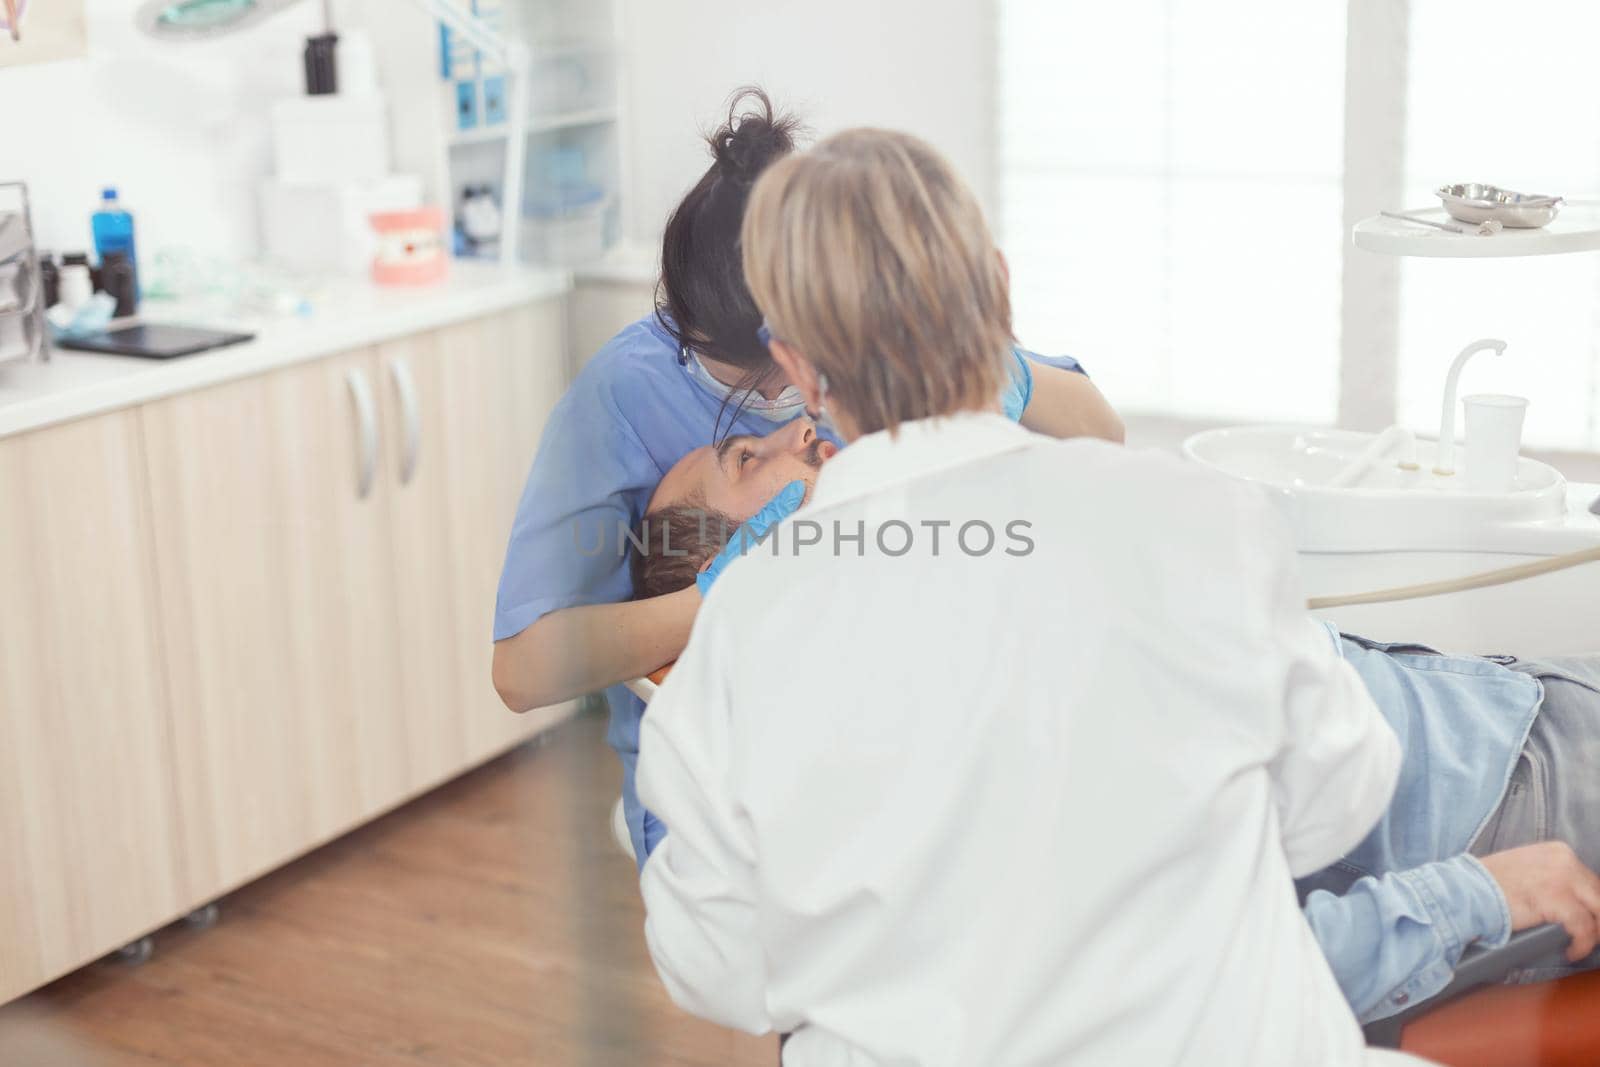 Sick patient sitting on dental chair with open mouth during stomatology procedure. Senior woman stomatologist and hospital nurse with masks holding sterilized tools checking teeth health